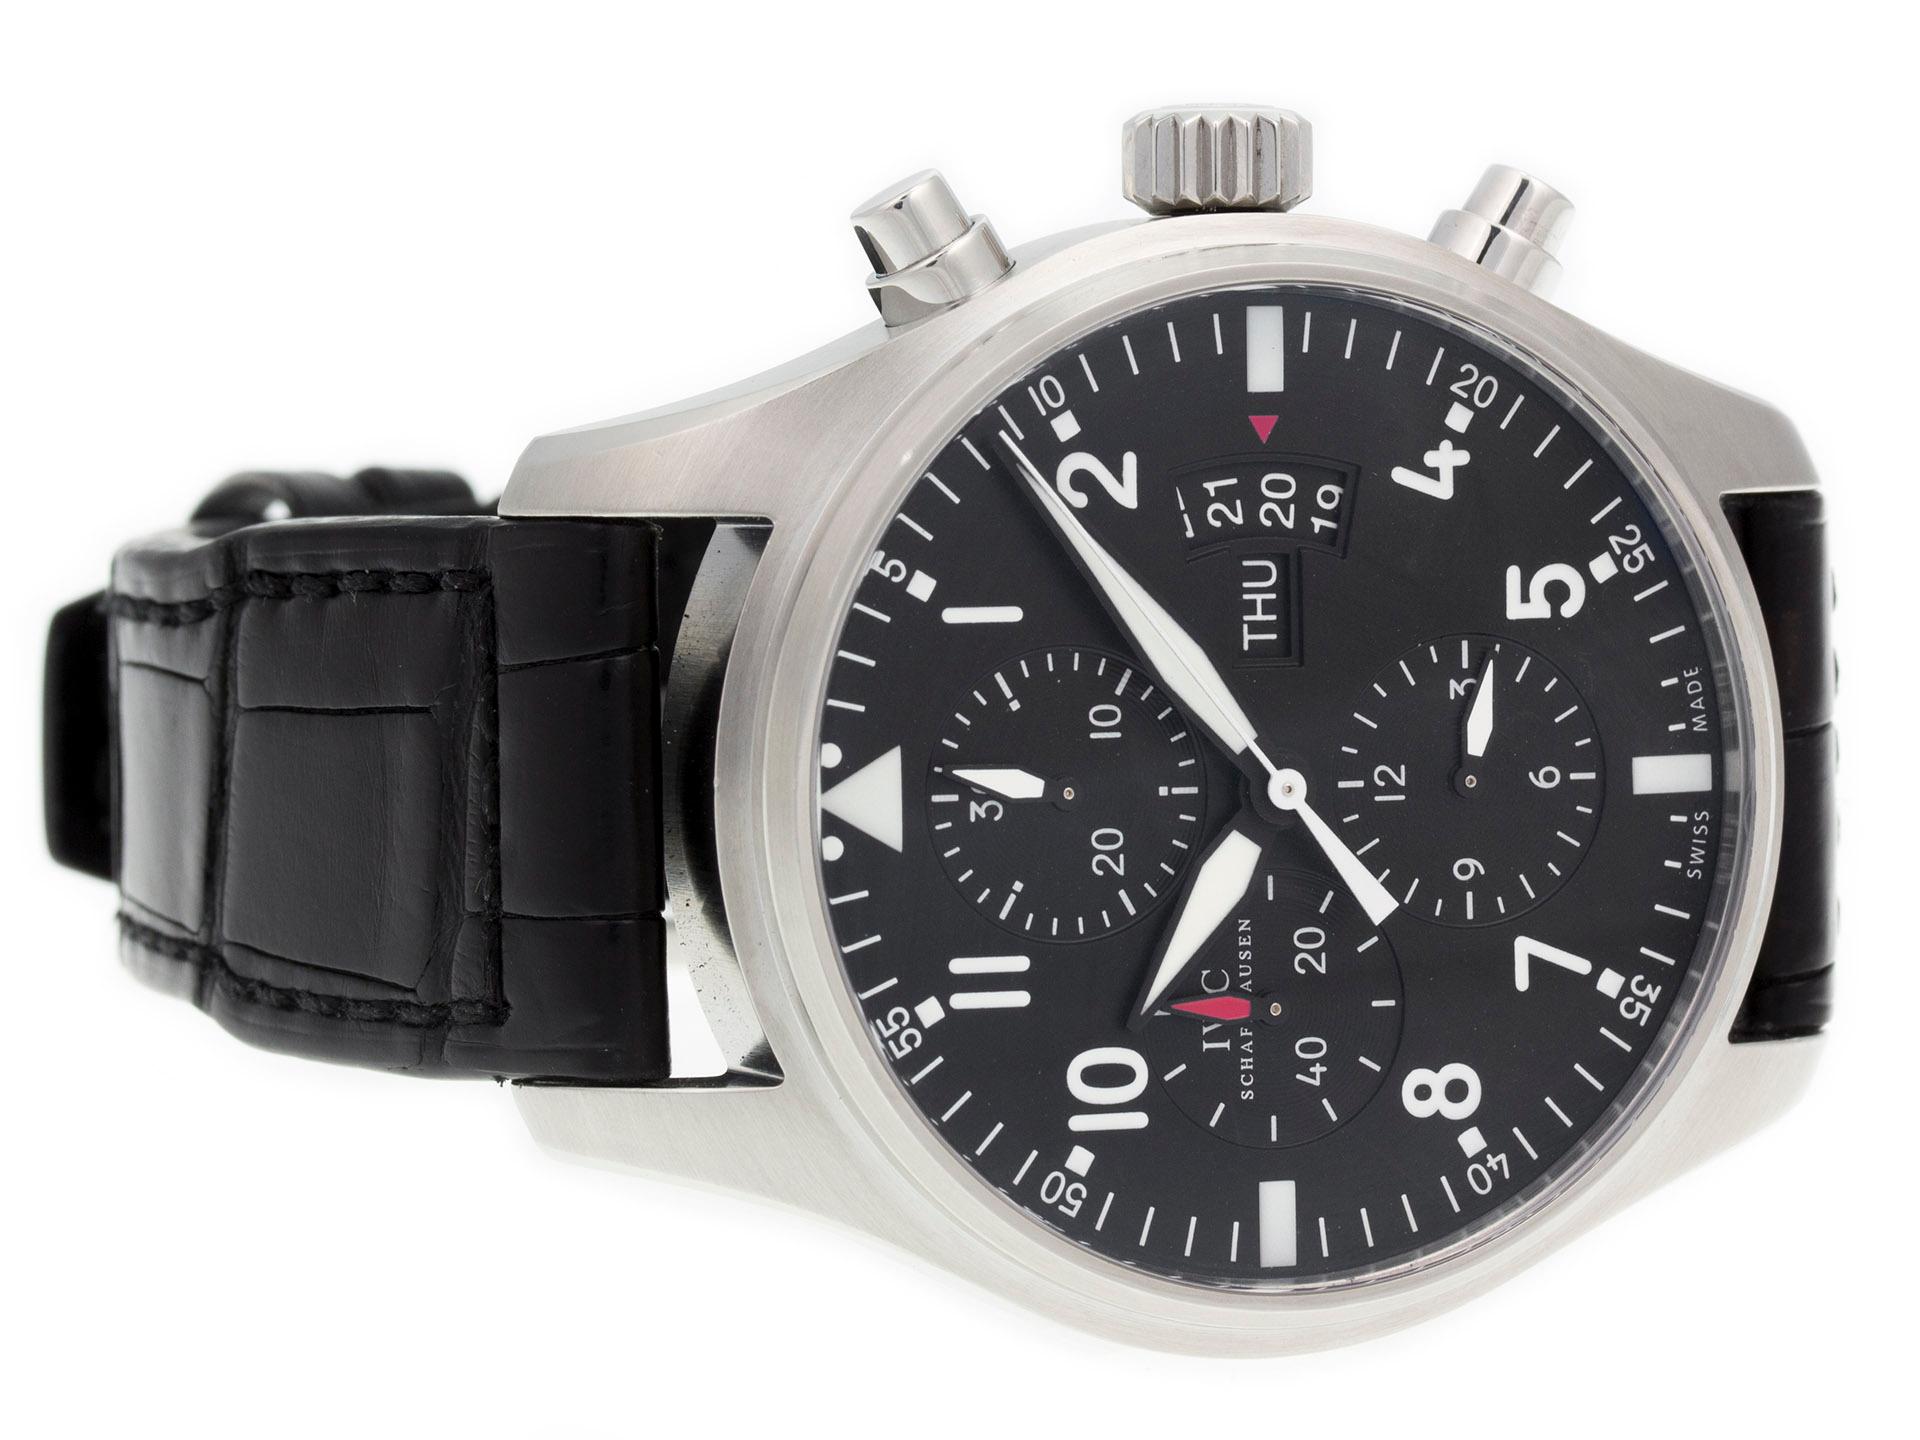 IWC Pilot Chronograph IW377701, water resistant 30 M / 100 FT, Fixed Stainless Steel Bezel, Fluted Stainless Steel Push / Pull w/ IWC Logo Crown, with a Black Crocodile Embossed Leather Band.

Watch	
Brand:	IWC
Series:	Pilot Chronograph
Model